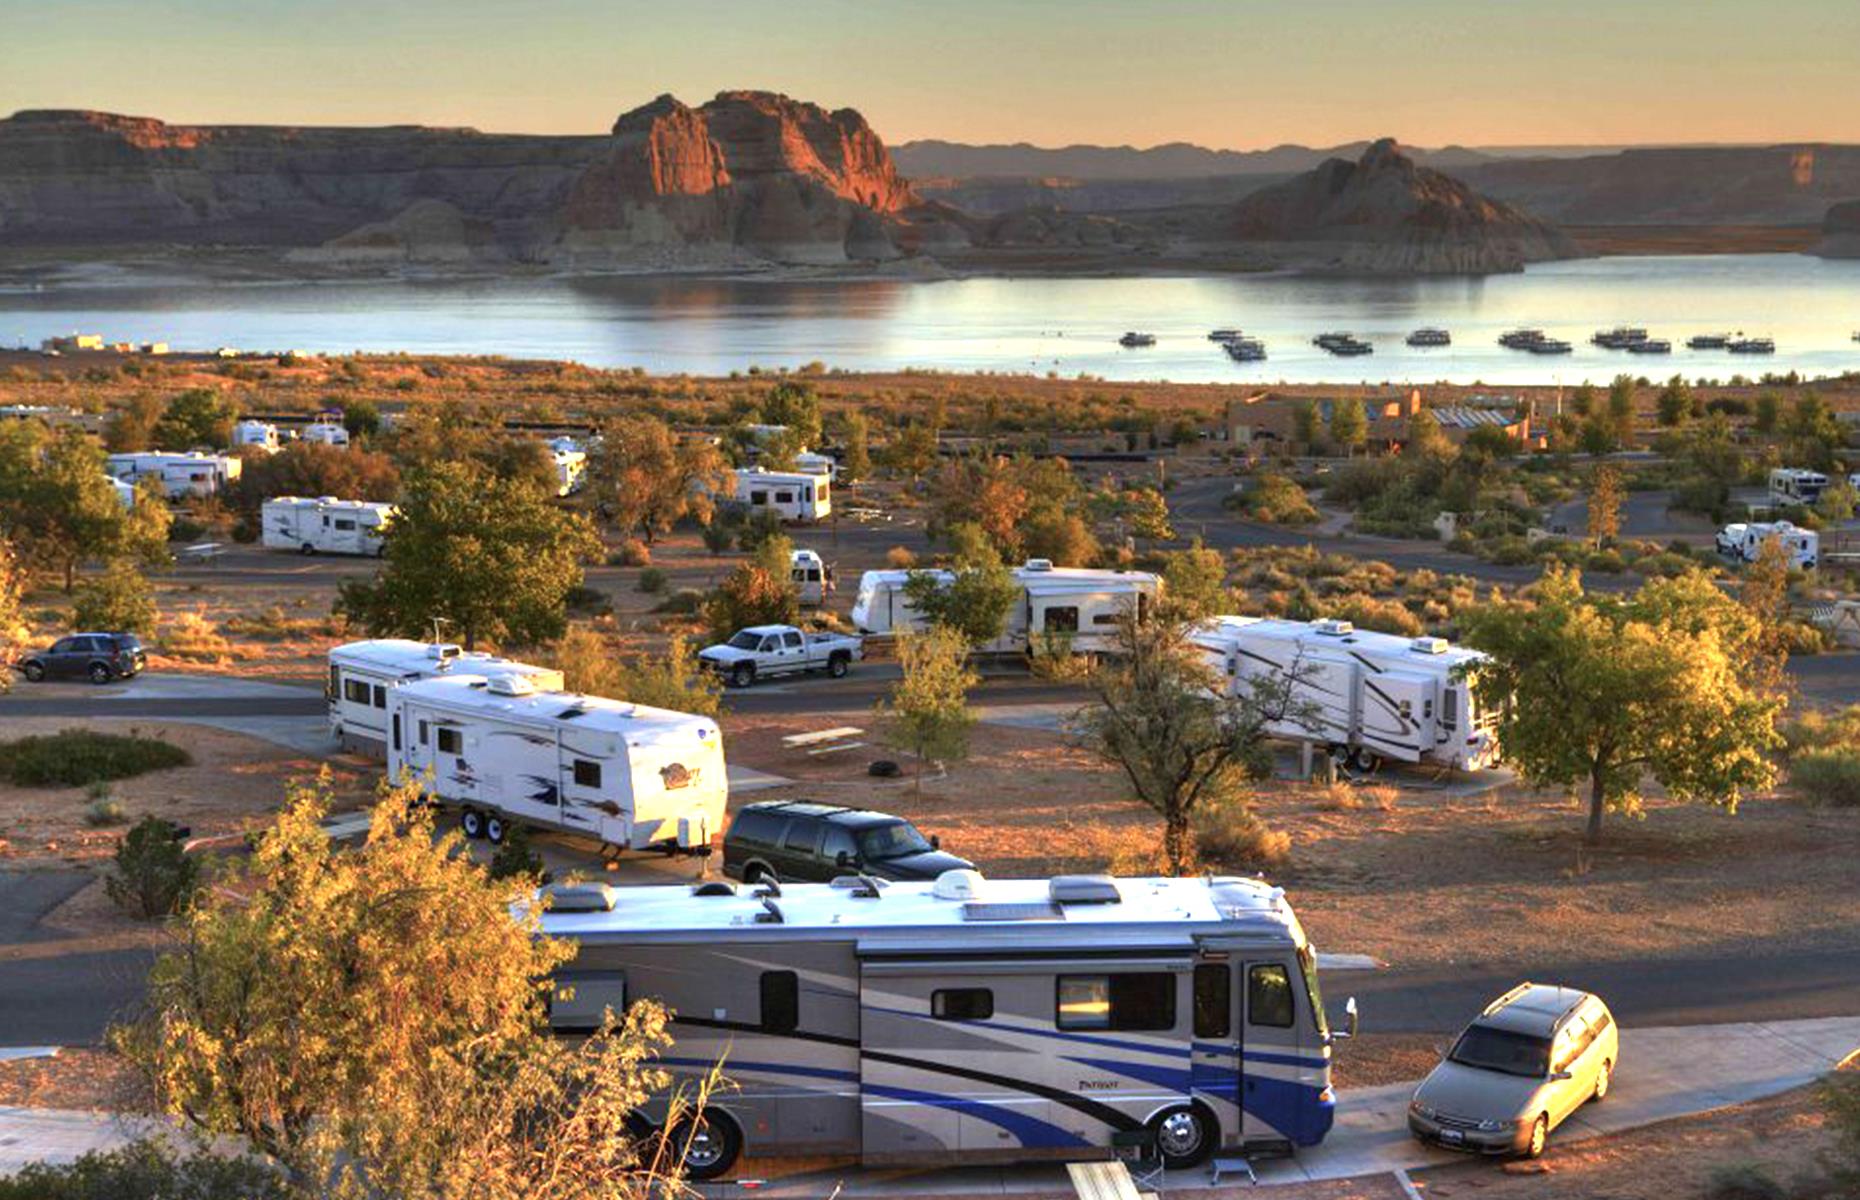 <p>Straddling the border between Utah and Arizona, Lake Powell is a freshwater reservoir backed by canyons and colorful striped rock formations. For that sweet spot between location and convenience, <a href="https://www.lakepowell.com/rv-camping/wahweap-rv-campground/">Wahweap Marina’s RV site</a> is tough to beat. There are electric hook-up sites, showers and shops, plus restaurants within walking distance. But there’s no compromising on the eye-popping views.</p>